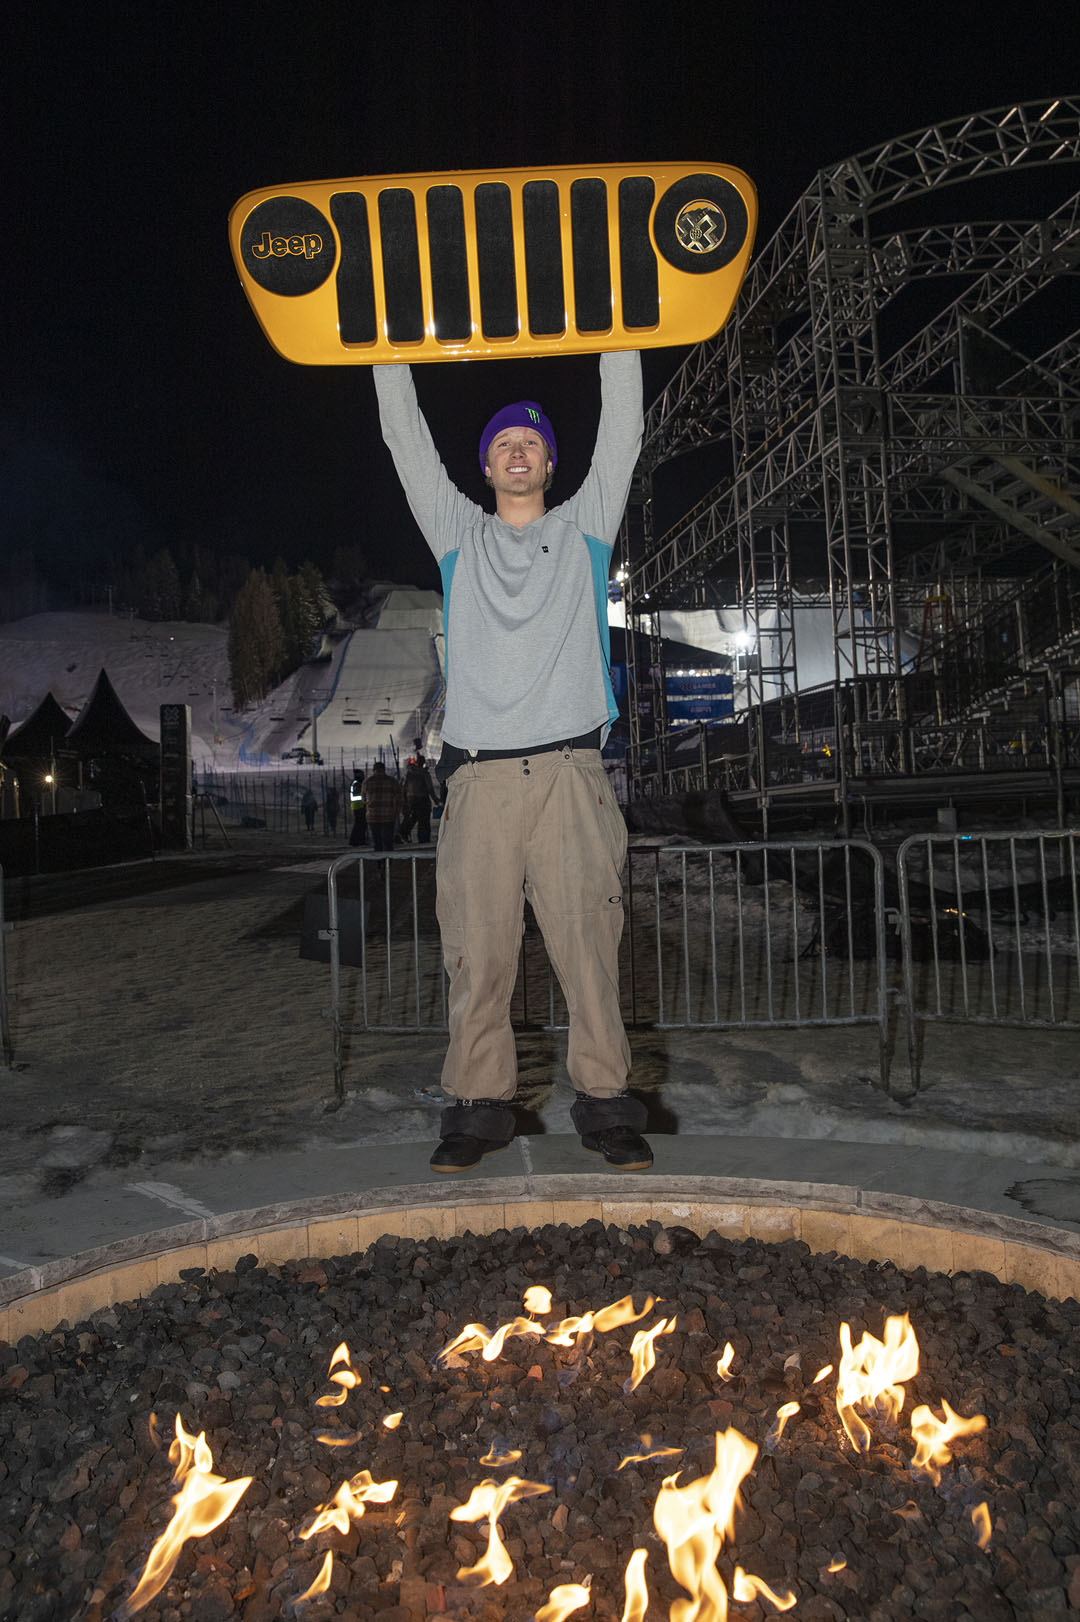 Monster Energy's Colby Stevenson Wins Best in Snow Award To Go Along With His Two Gold Medals in Ski Knuckle Huck and Ski Slopestyle